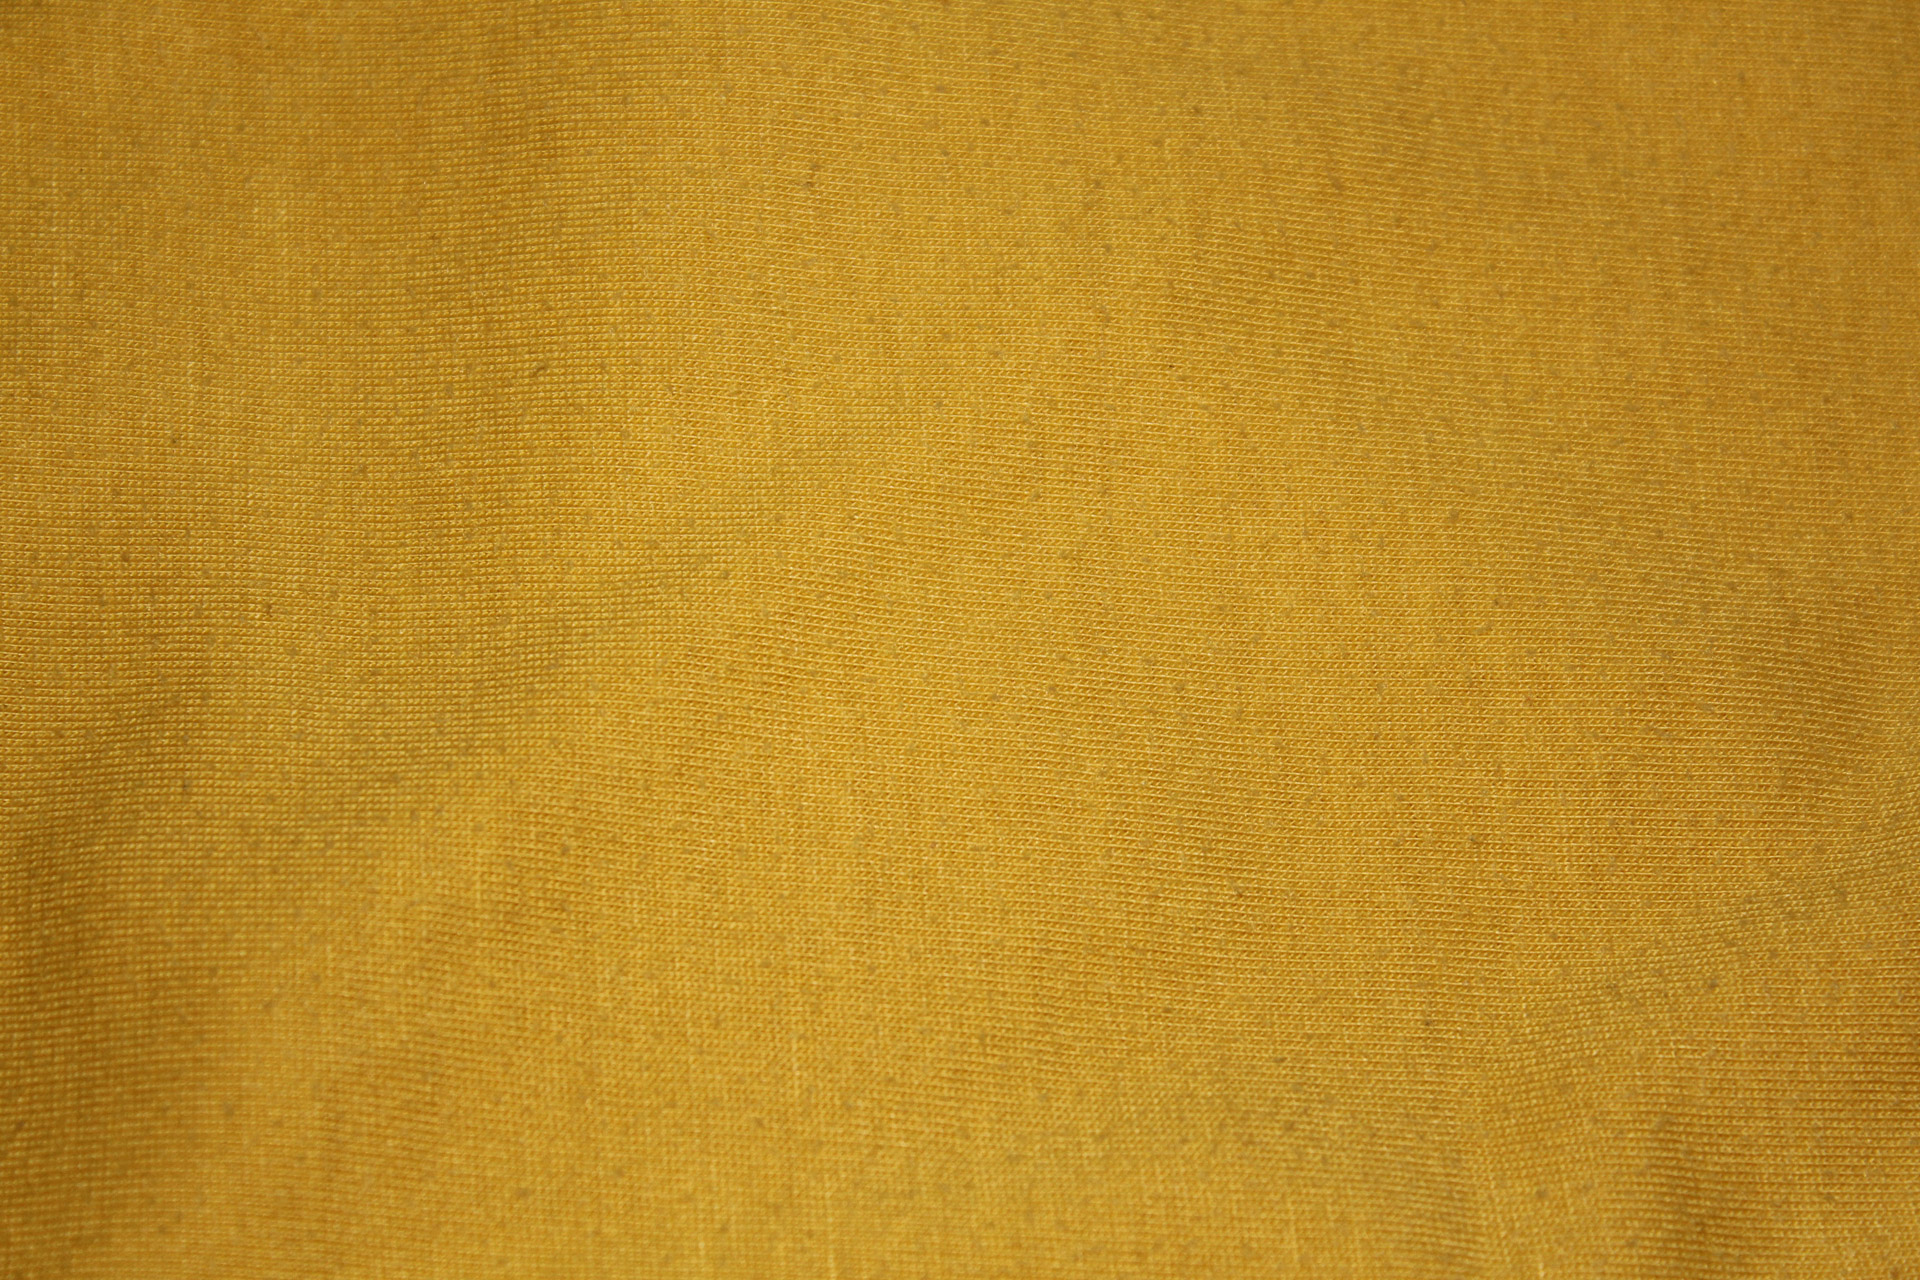 Yellow Gold Textile Background